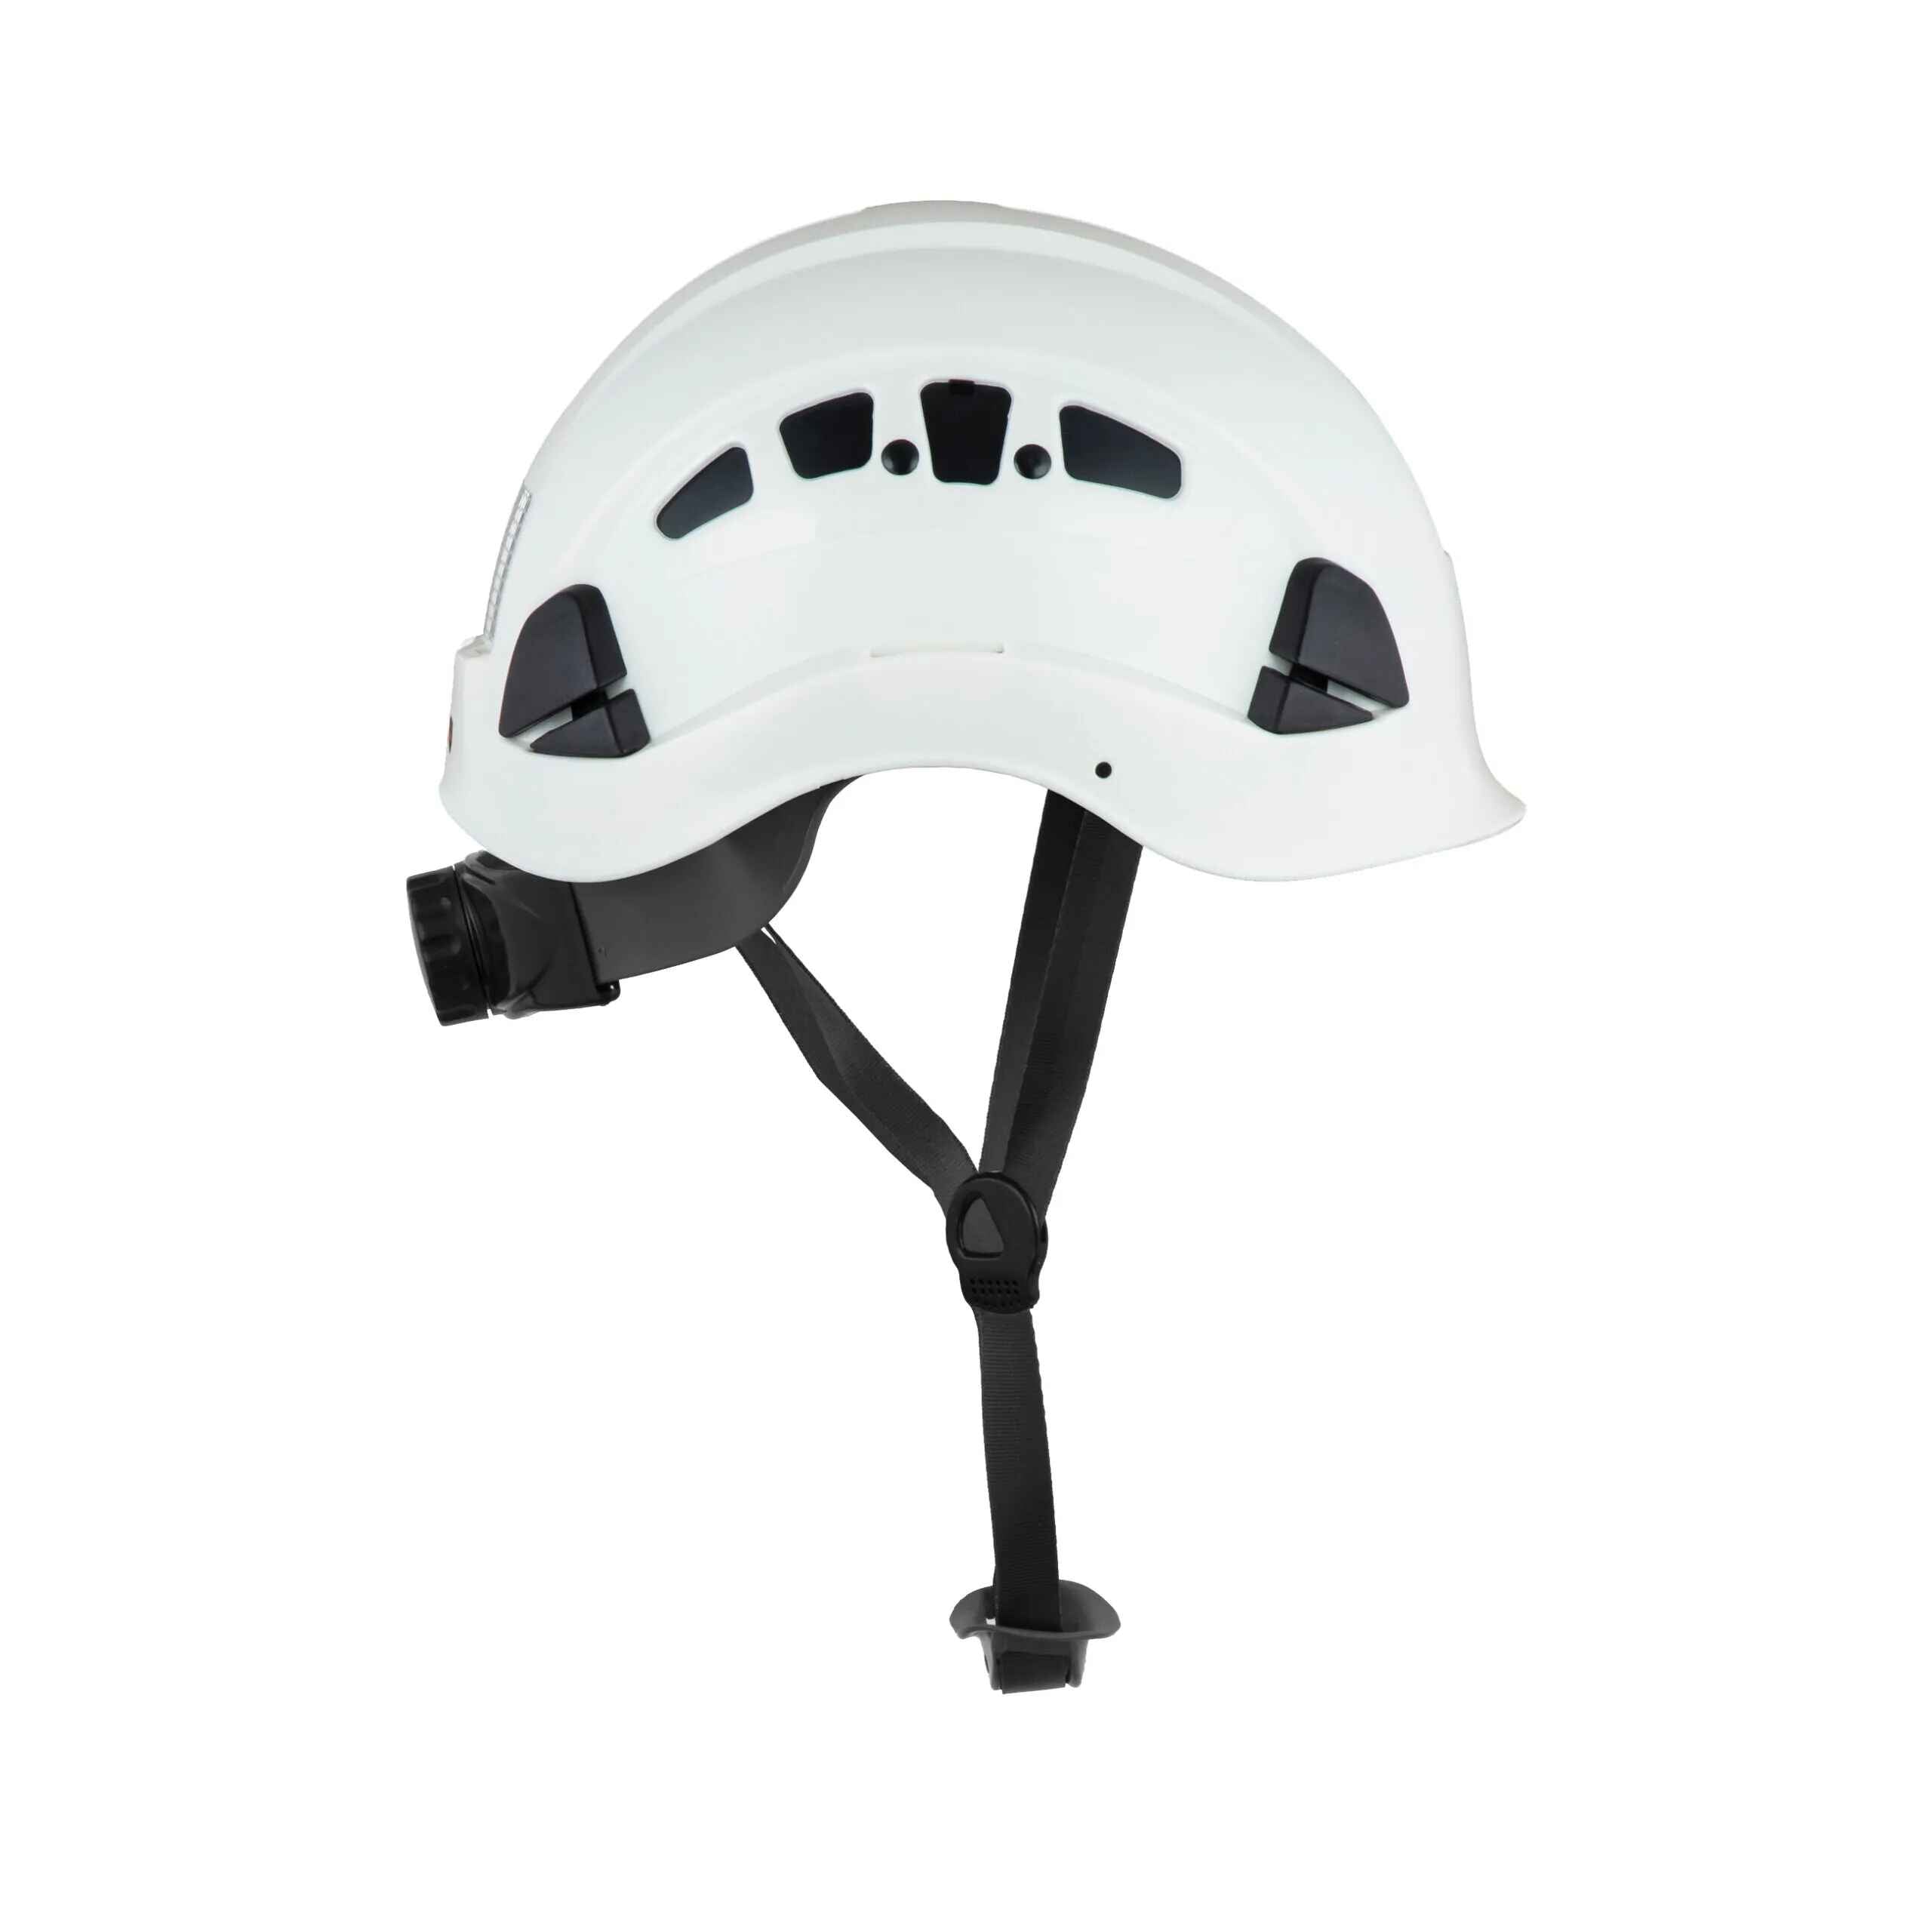 H1-CH Safety Helmet Type 1, Class C, ANSI Z89 & EN 397 Rated - Defender Safety